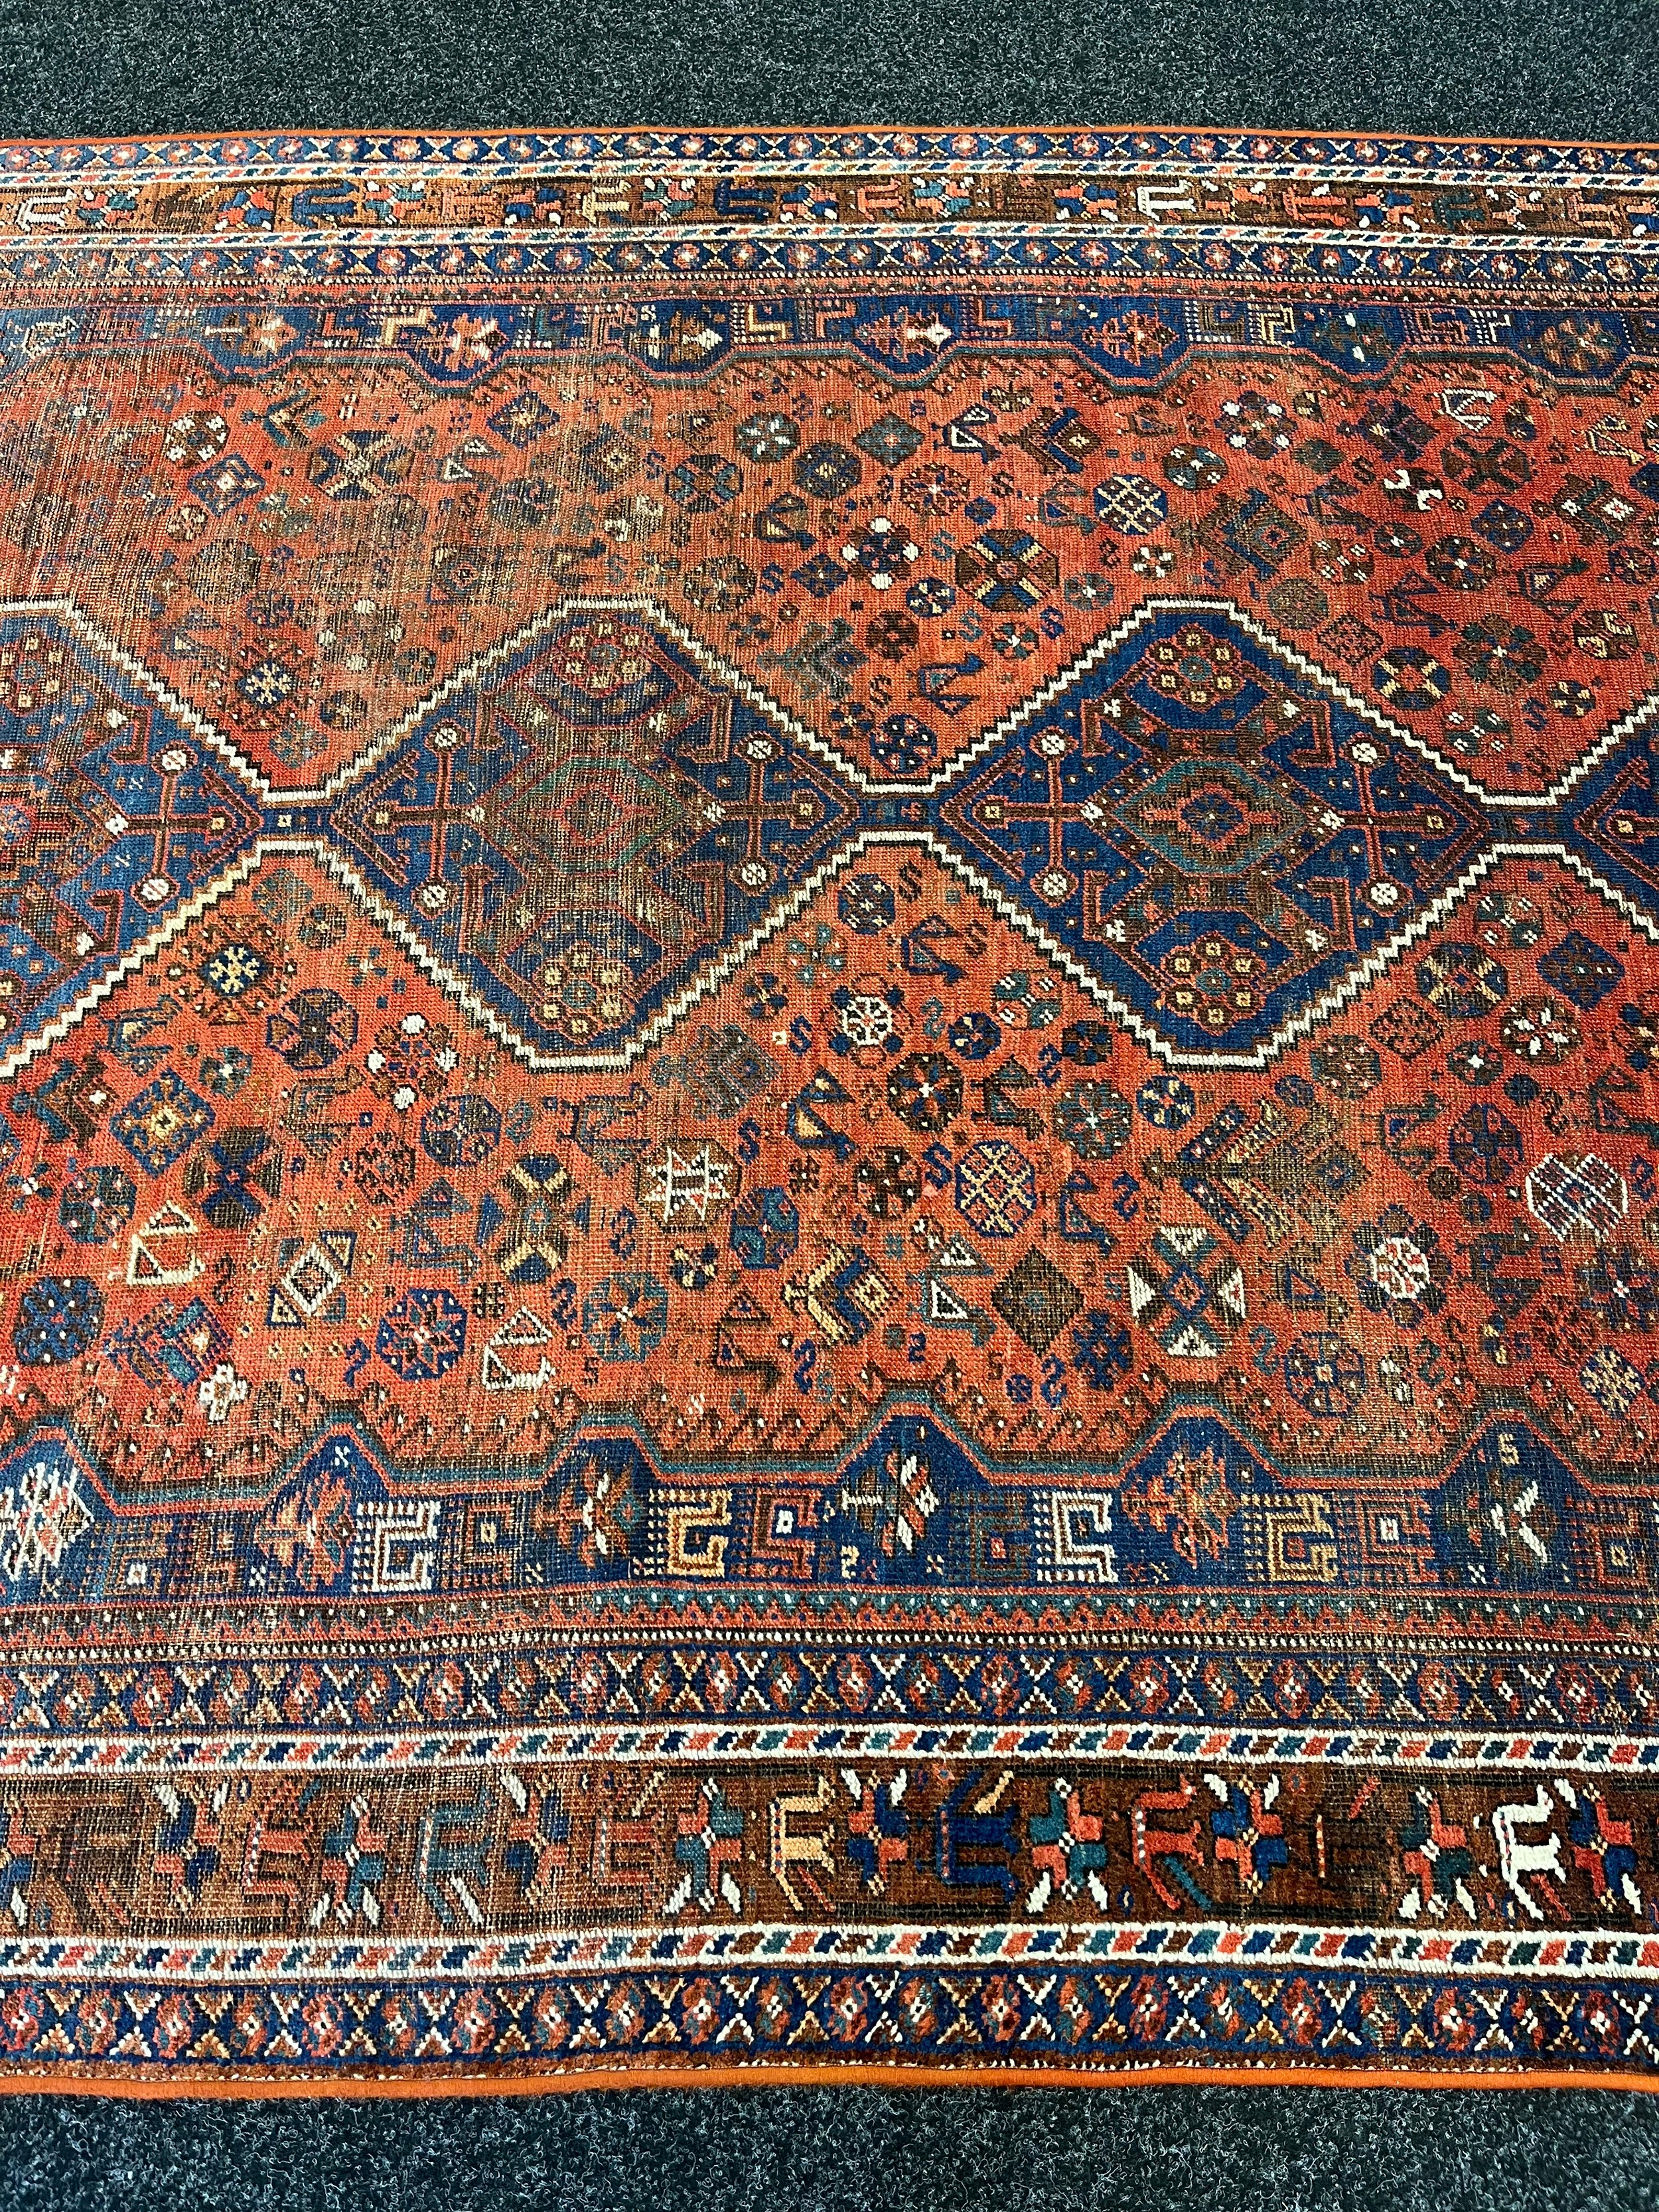 Provinz Gaschgai Iranian rug with certificate of authenticity [200x300cm] - Image 5 of 10